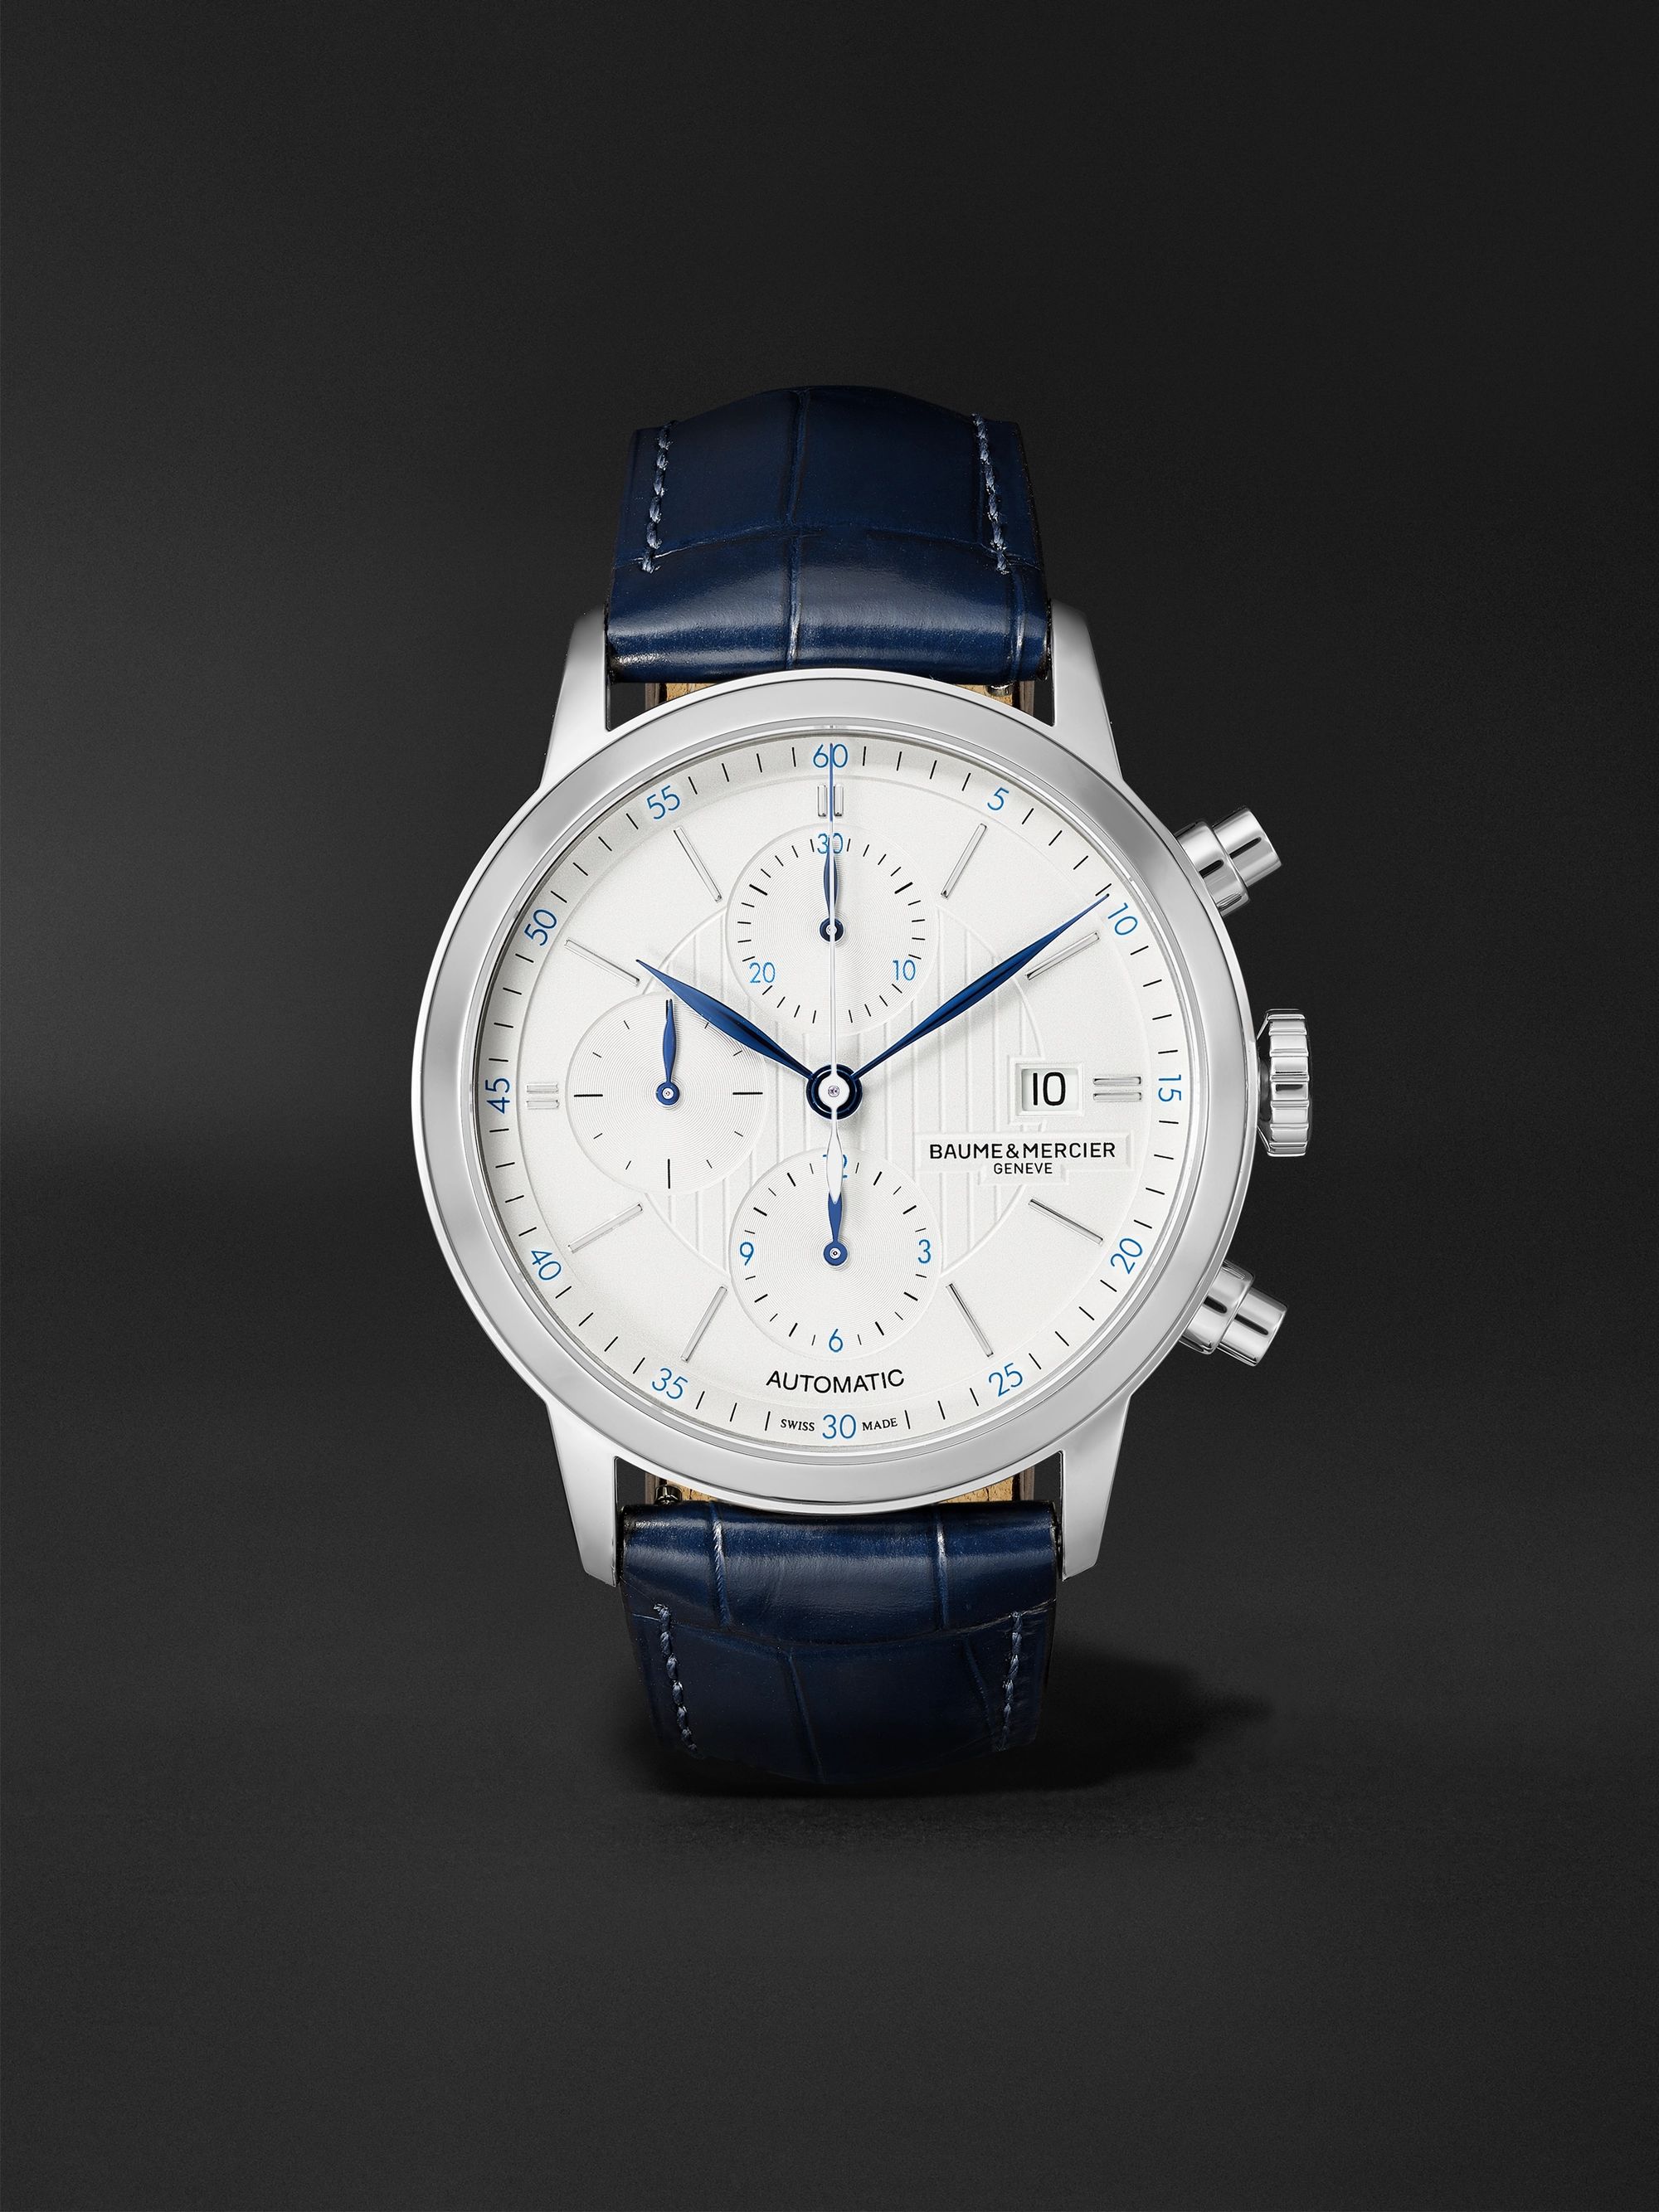 BAUME & MERCIER Classima Automatic Chronograph 42mm Steel and Alligator Watch, Ref. No. M0A10330